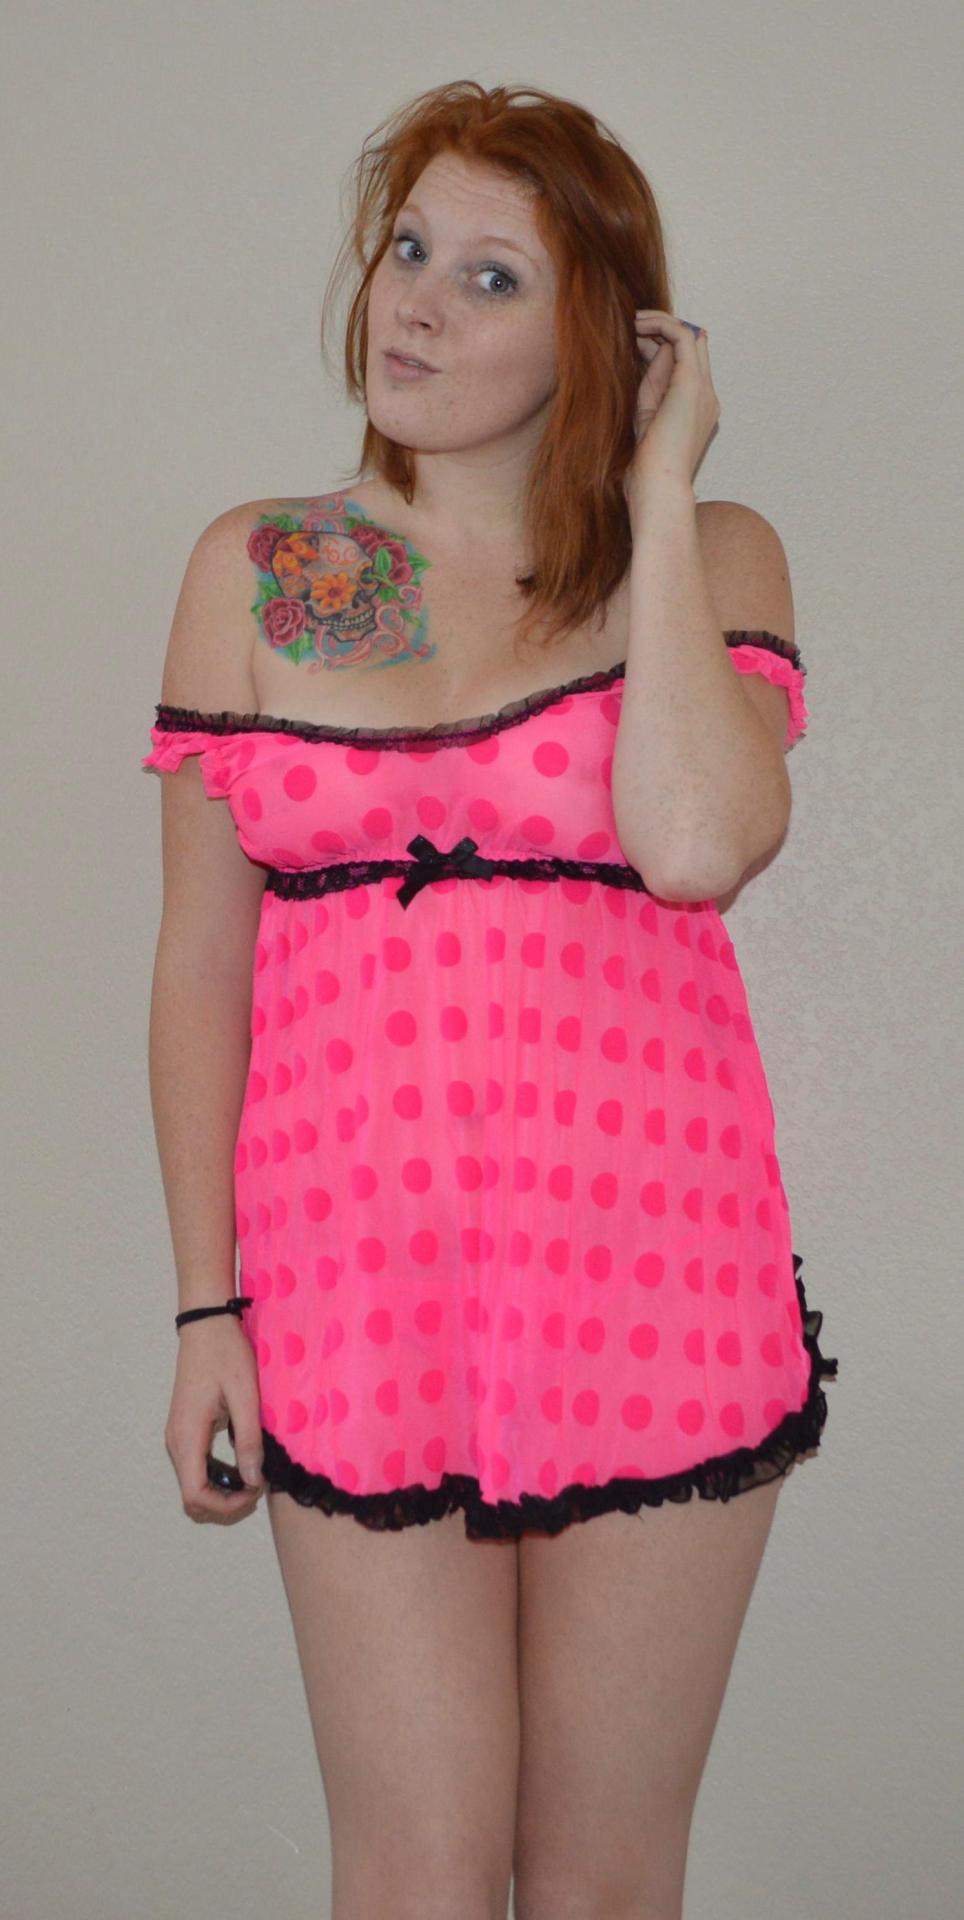 Southernlittleb shows off in a hot pink polka dotted babydoll